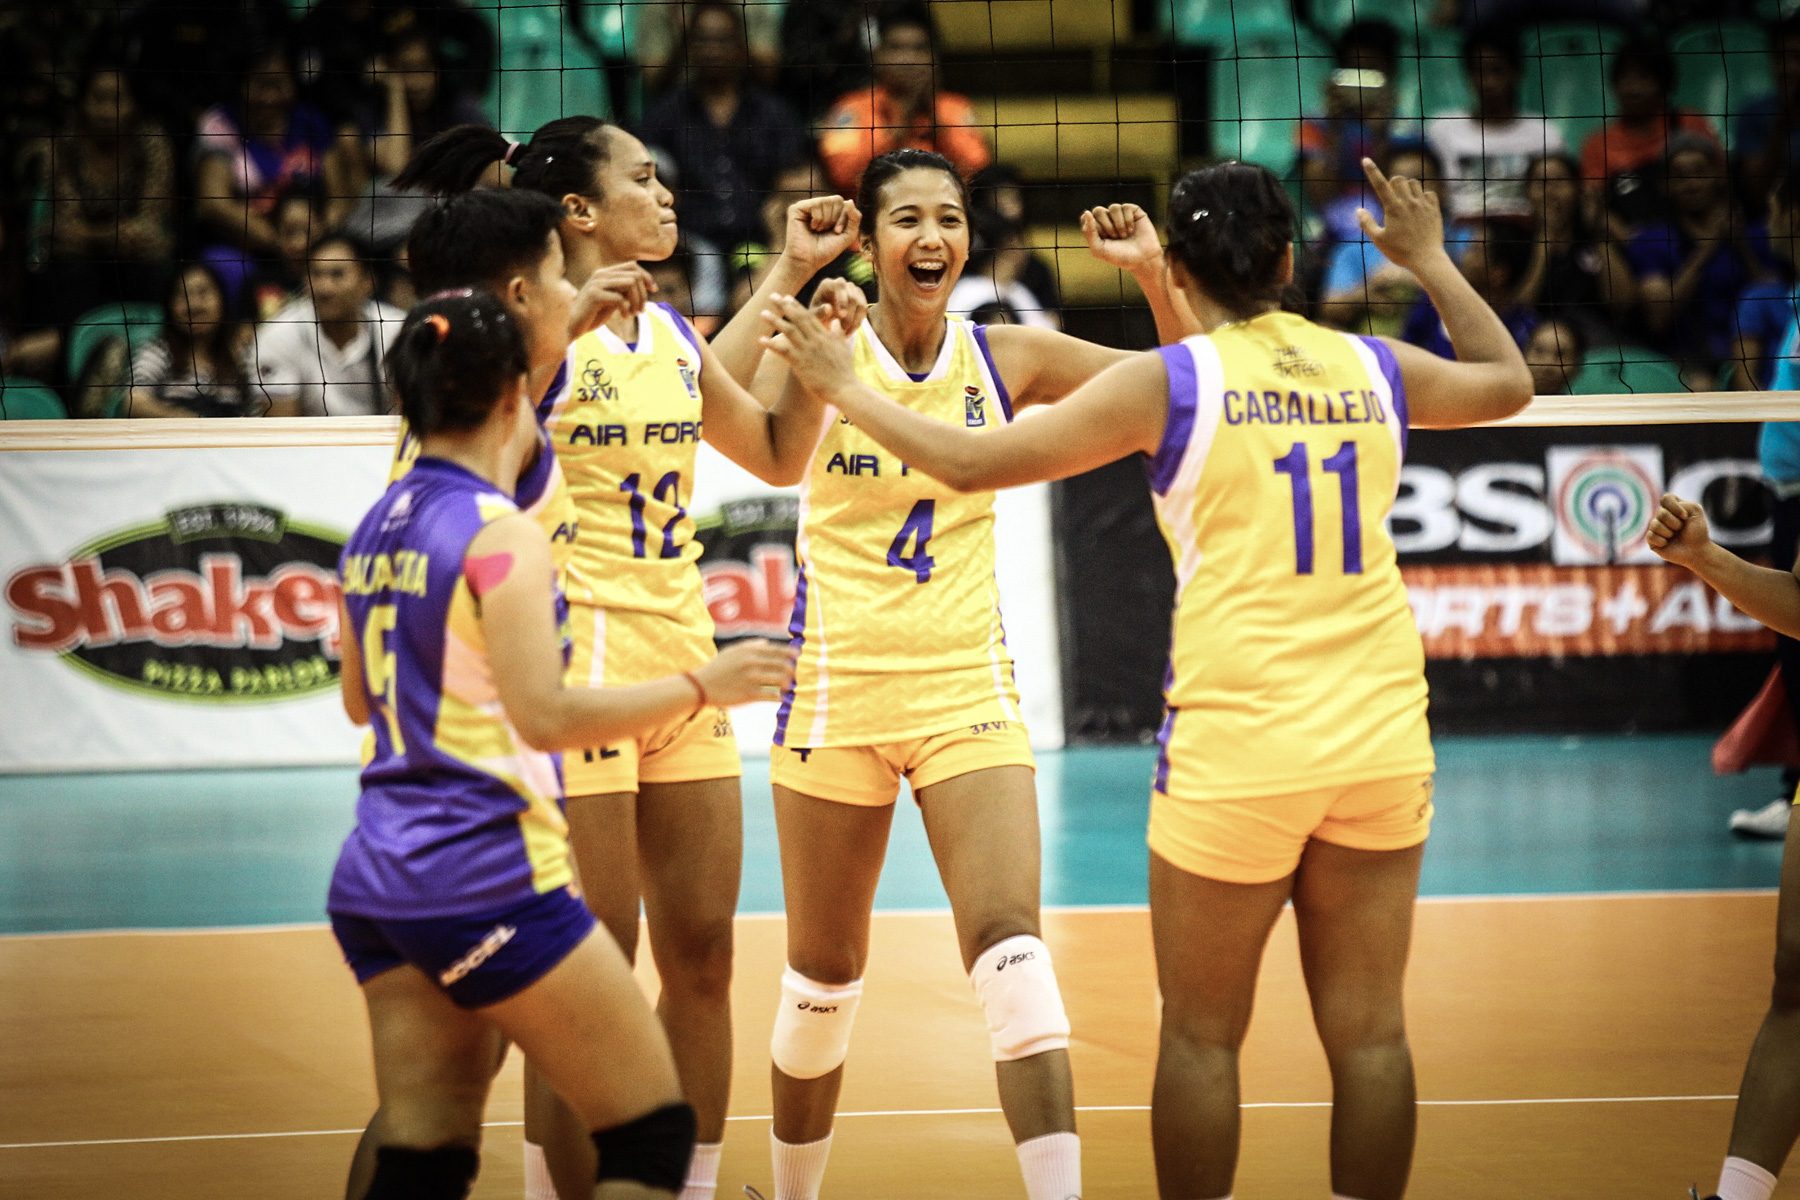 V-League: Air Force rallies late to win finals Game 1 over Pocari Sweat